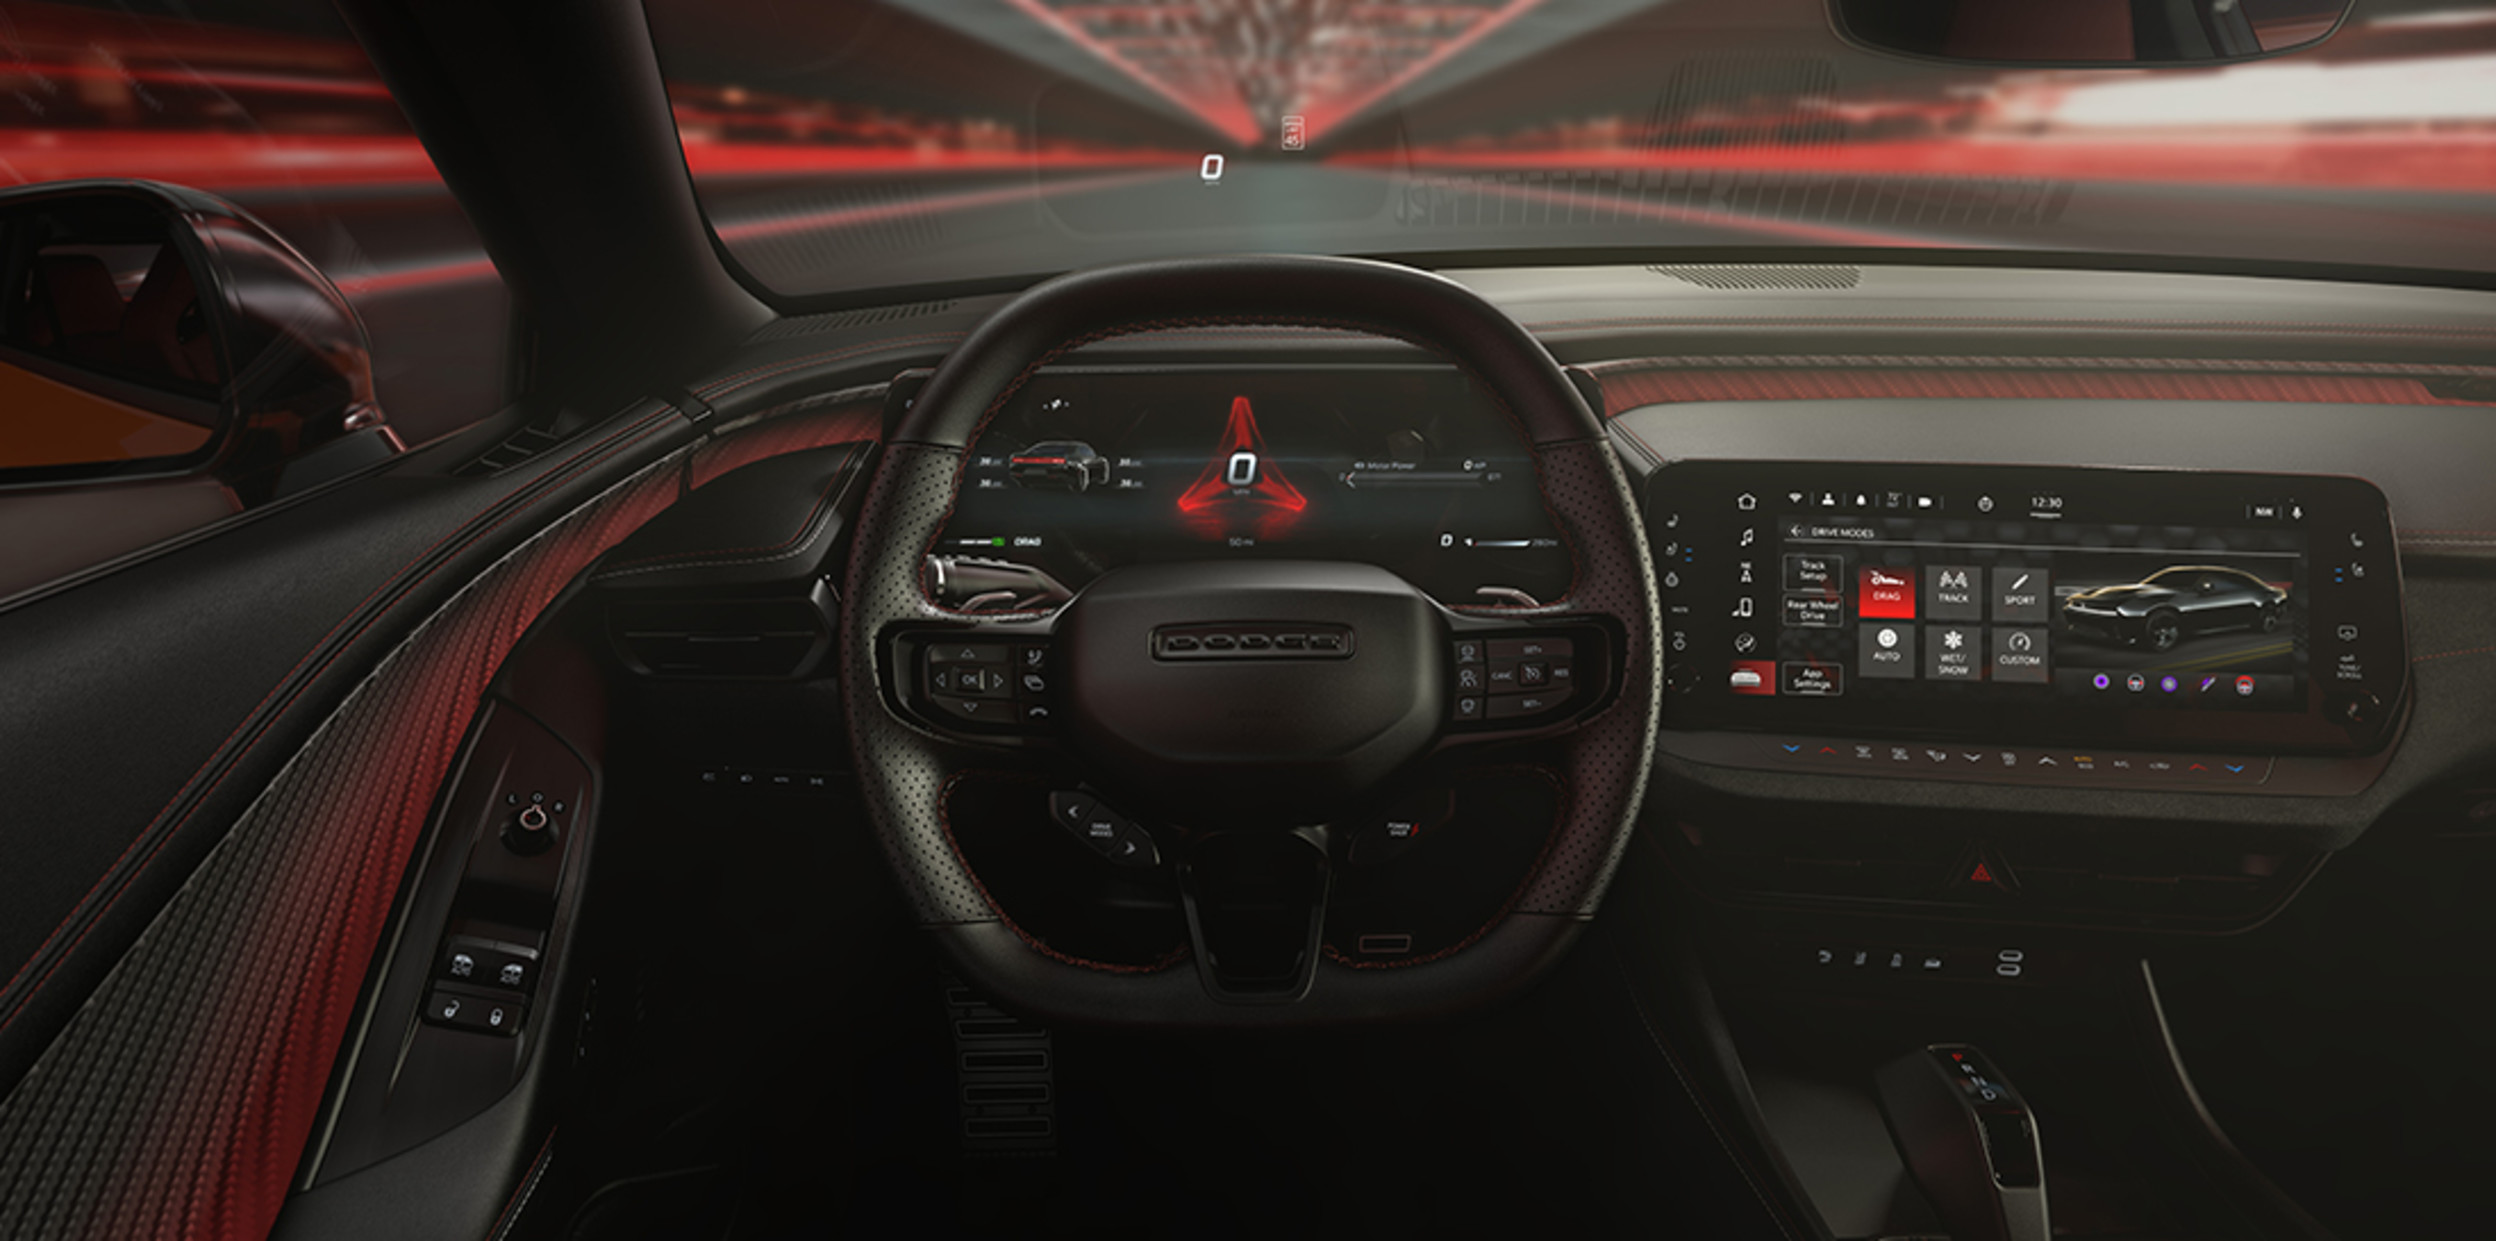 A close-up of the steering wheel inside a Dodge vehicle, from the driver seat.